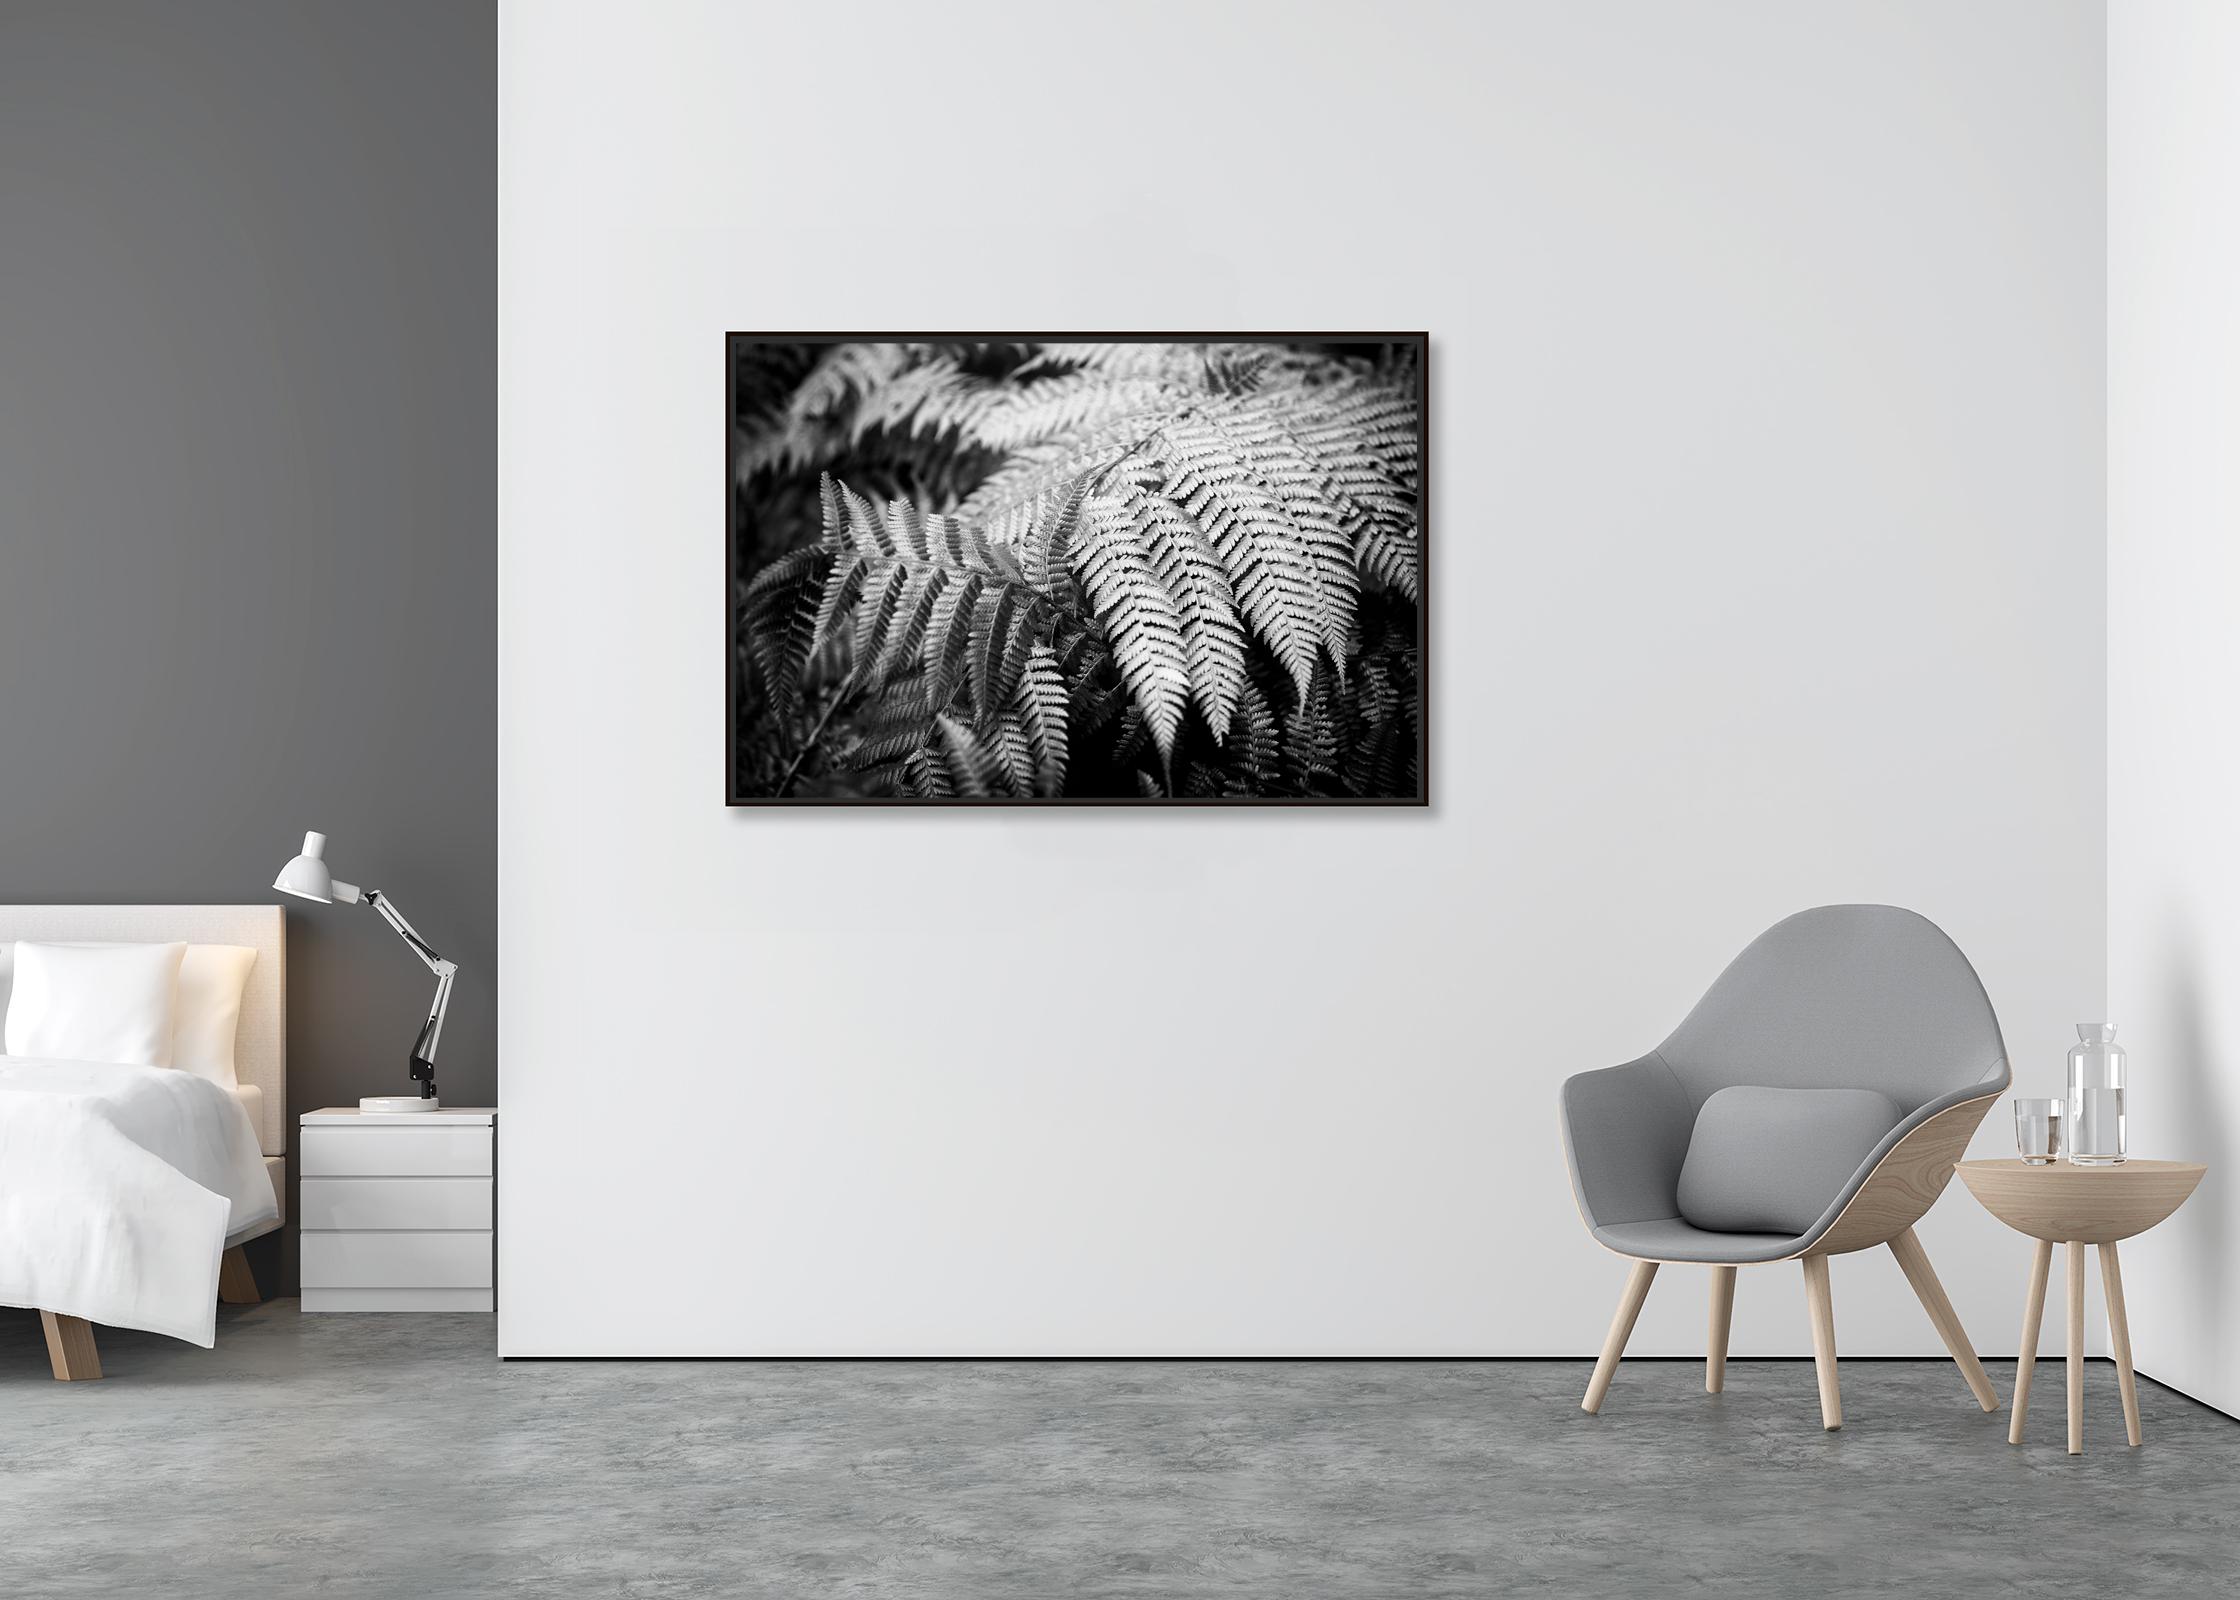 Polypodiopsida, Spain, black and white fine art photography, landscape, flora - Contemporary Photograph by Gerald Berghammer